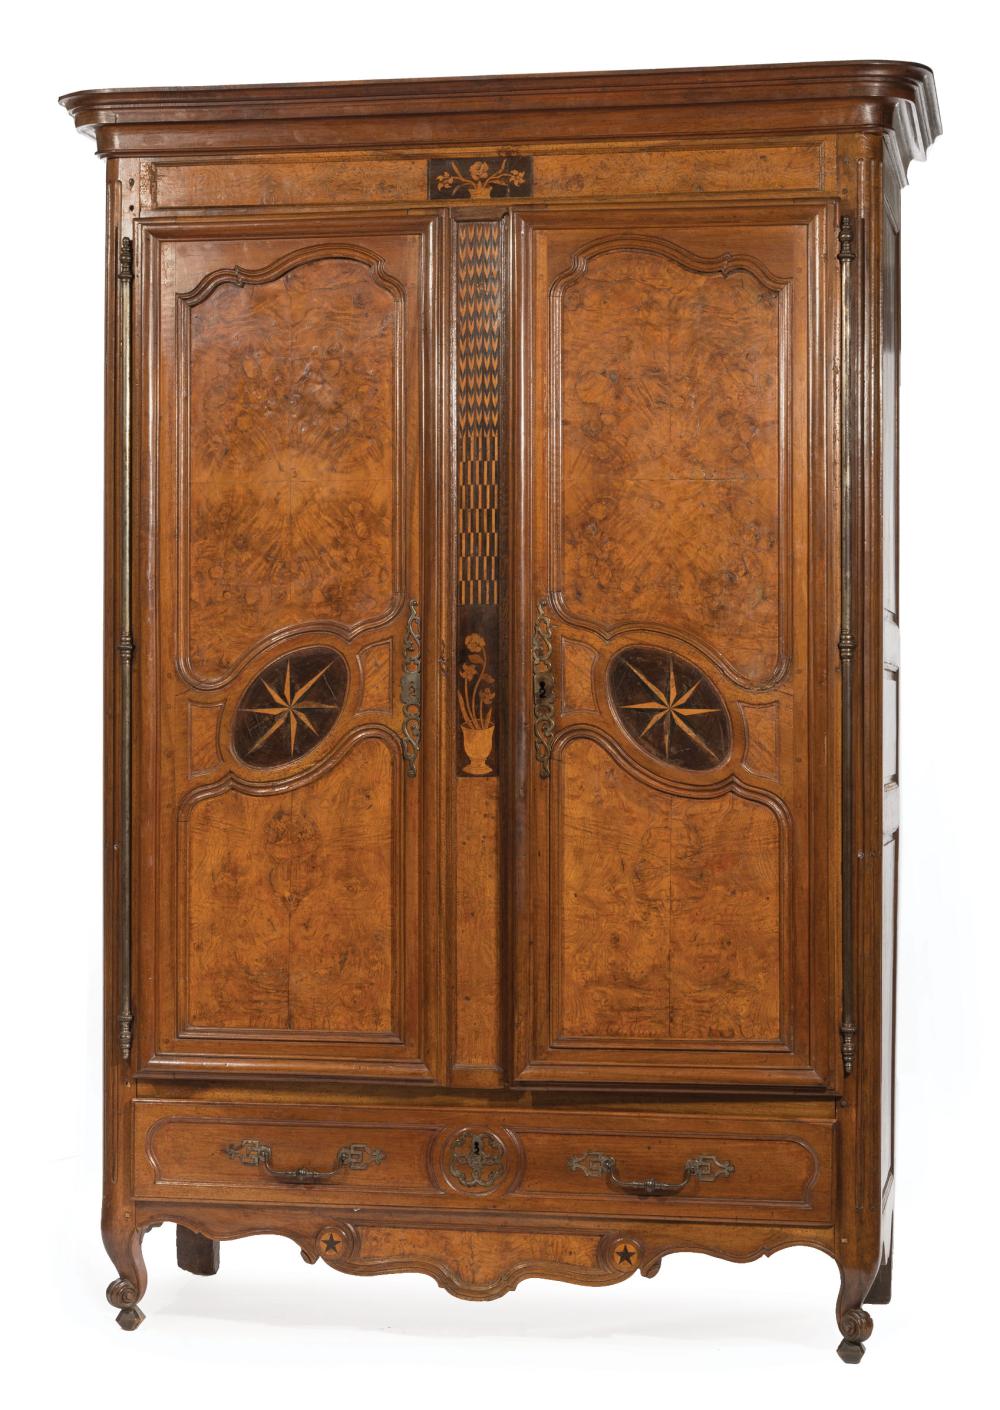 FRENCH INLAID AND BURL WALNUT ARMOIREAntique